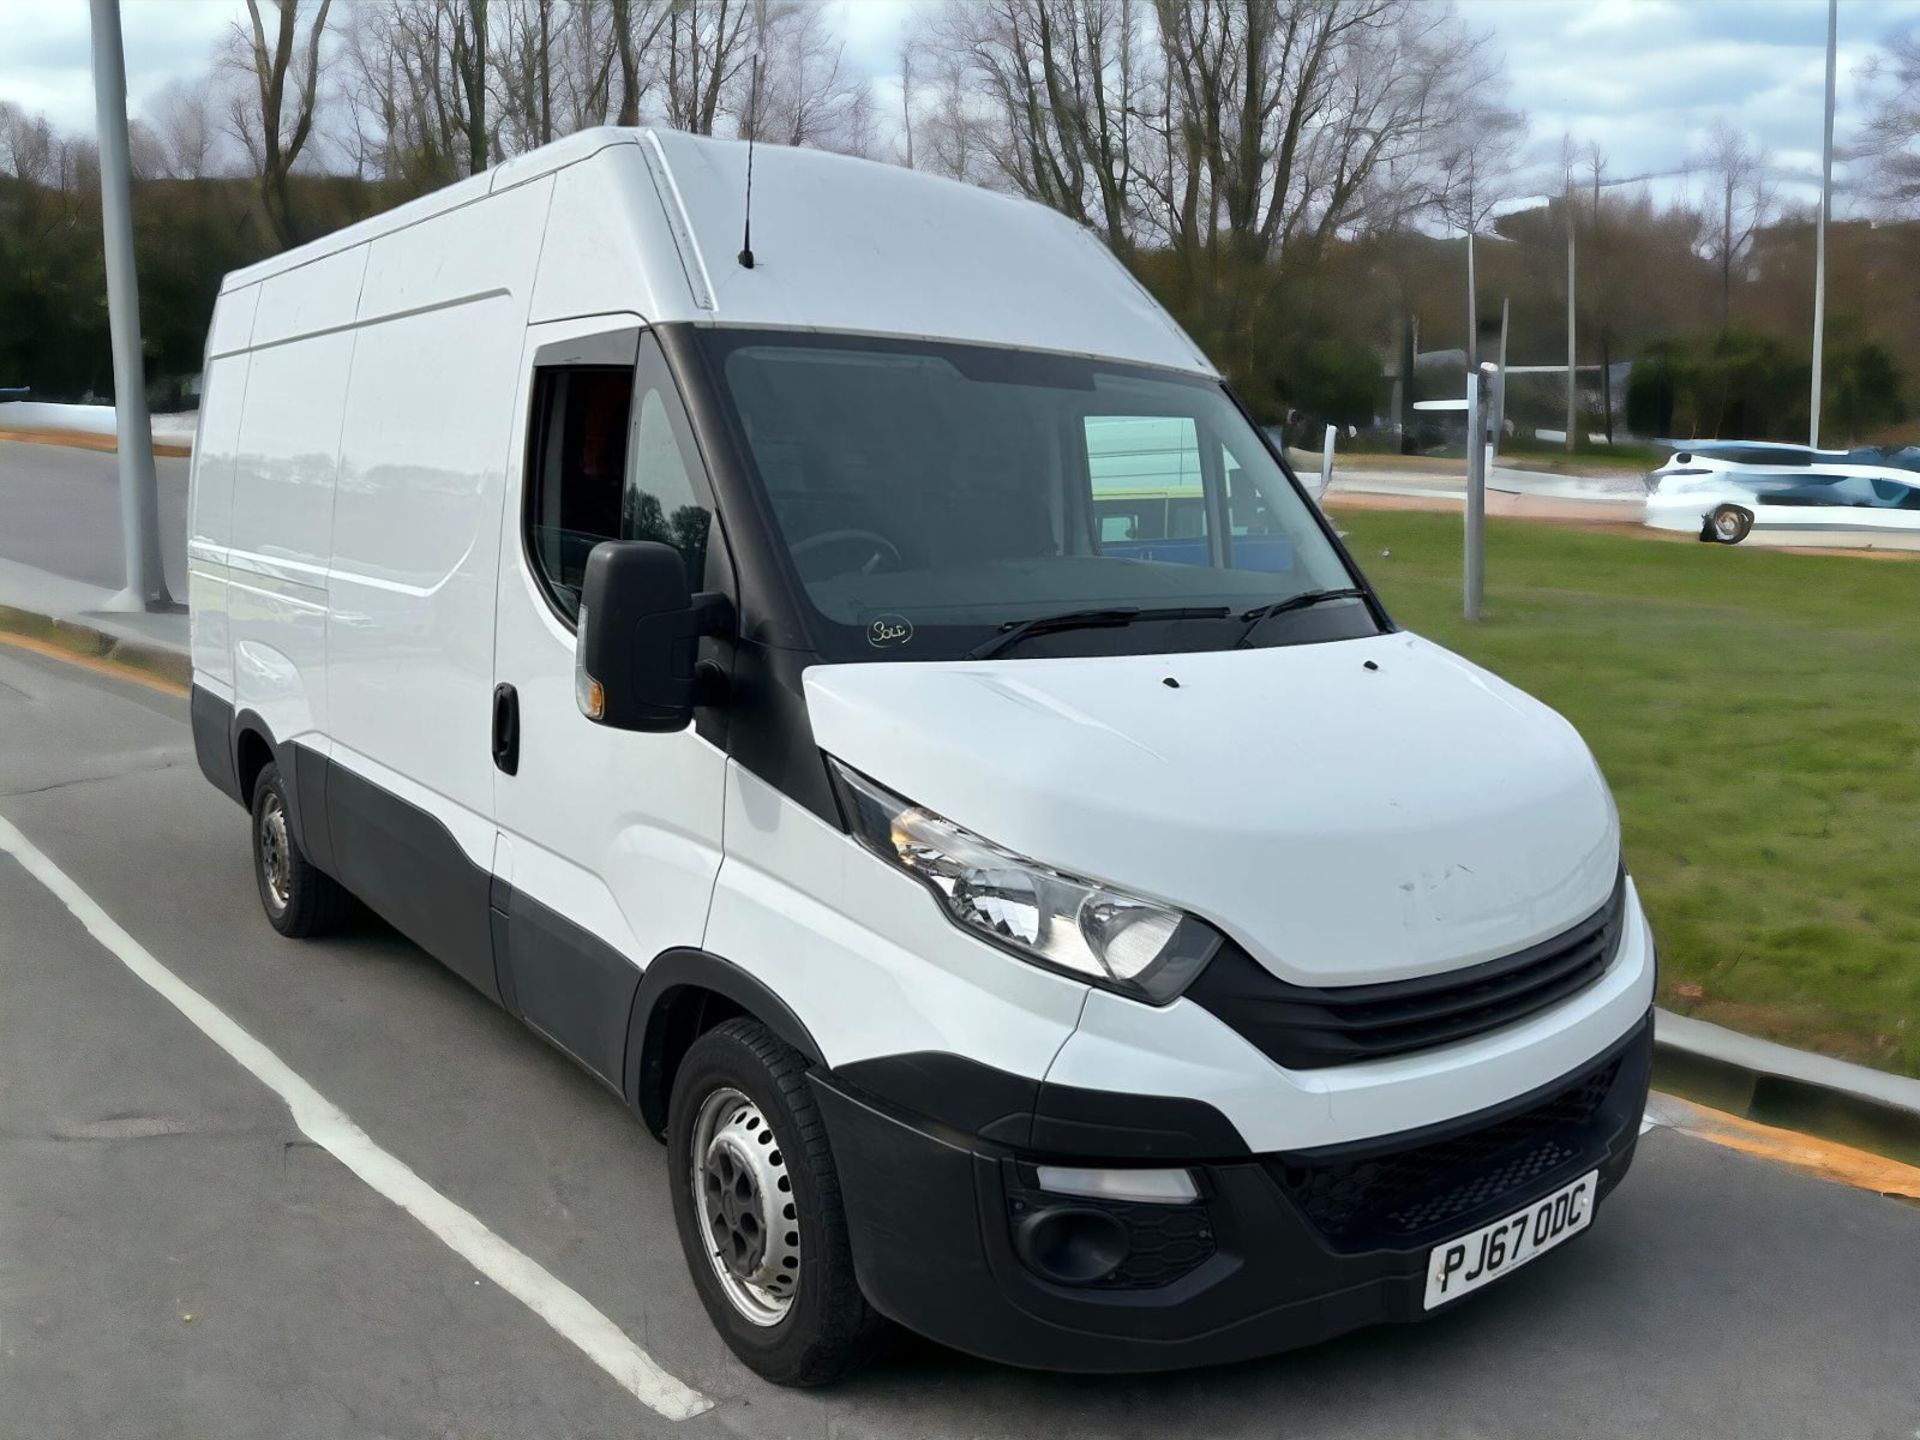 2017-67 REG IVECO DAILY 35S -HPI CLEAR - READY FOR WORK! - Image 5 of 12